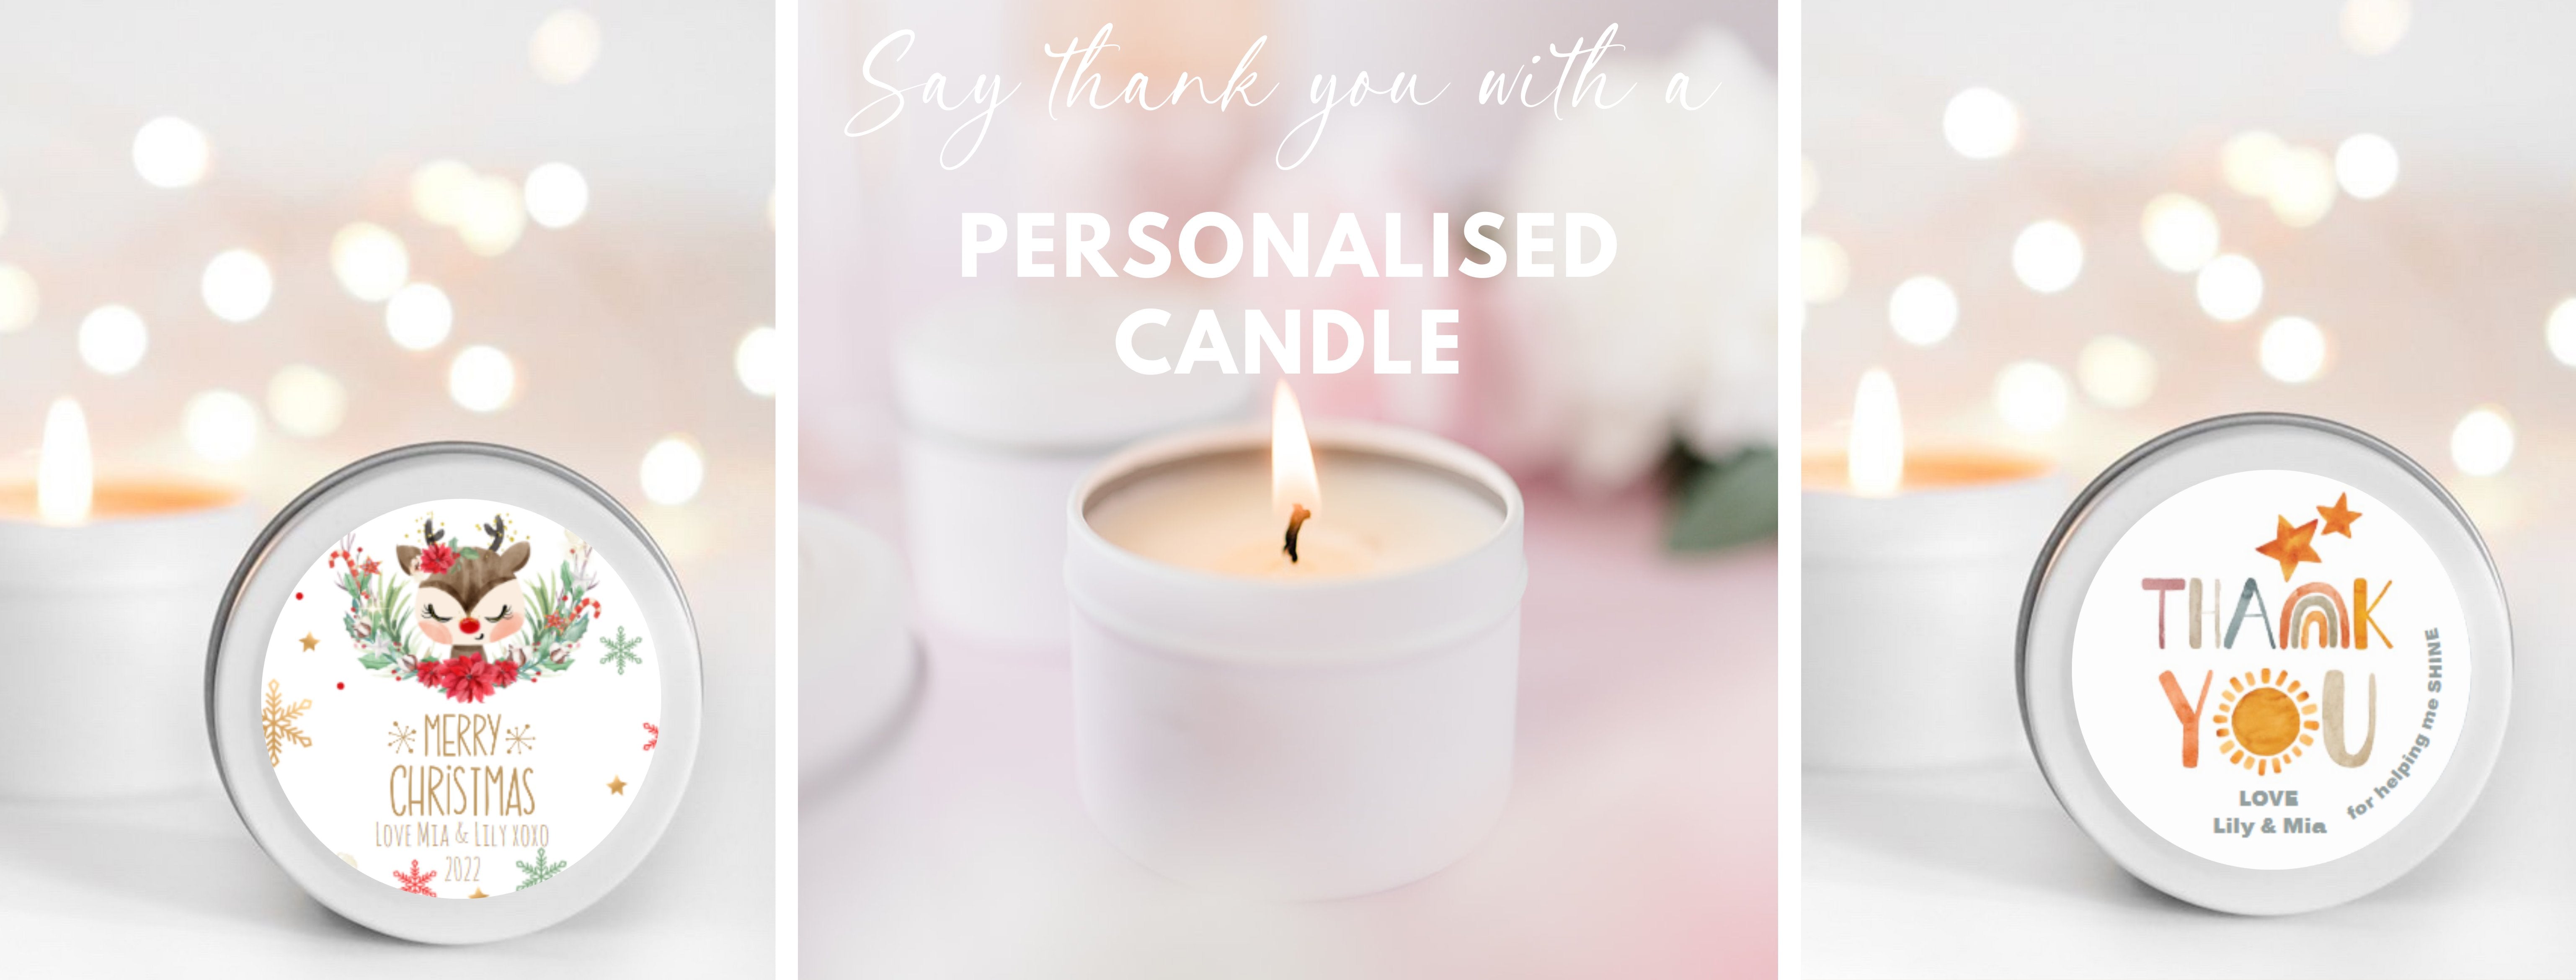 Friendship Gifts | Custom Friendship Candle Gift | Silk Ivory Candles